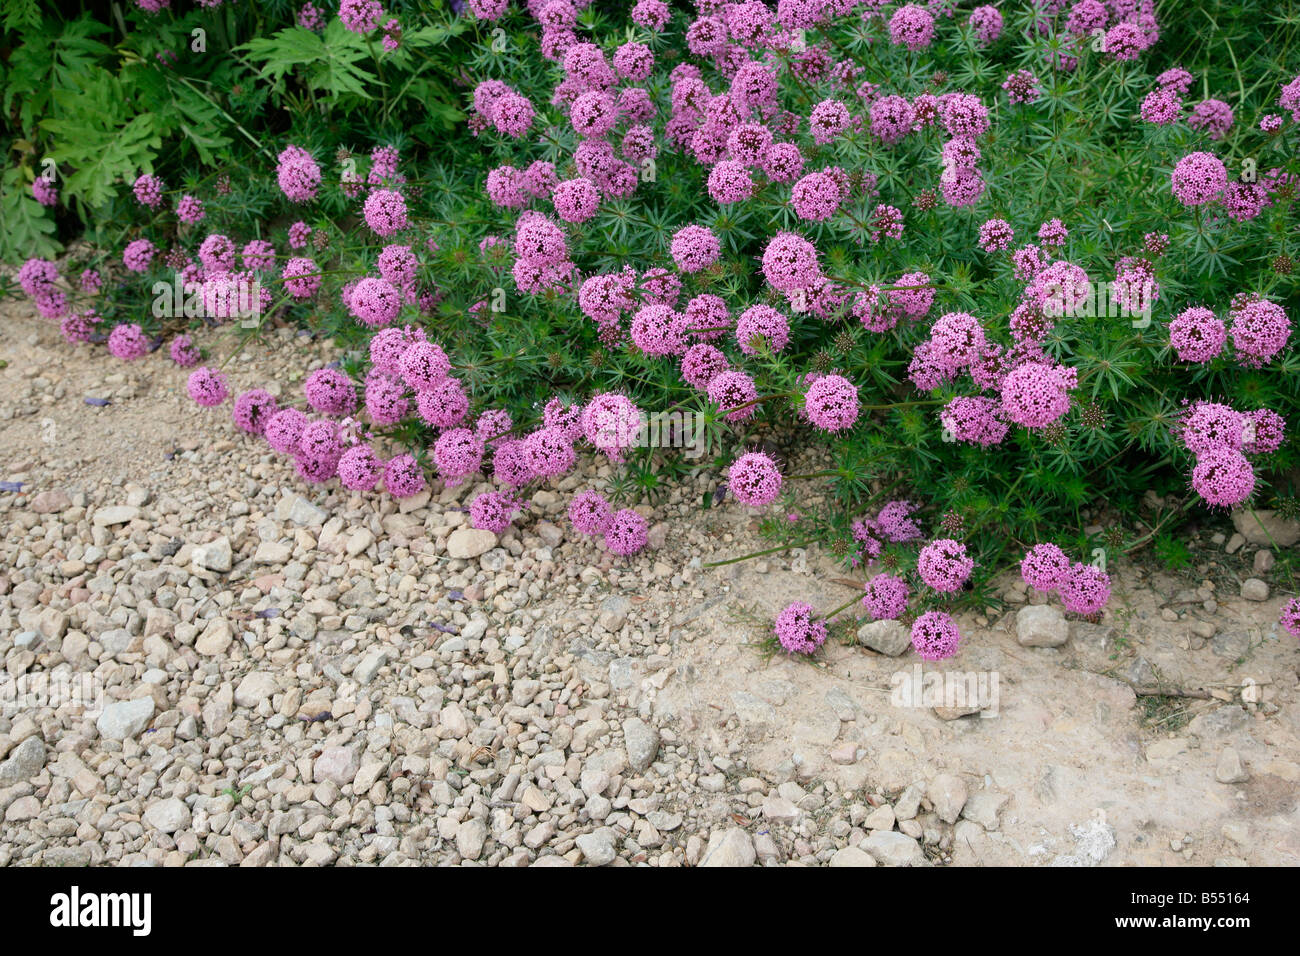 Phuopsis stylosa flowers spilling over a garden path Stock Photo